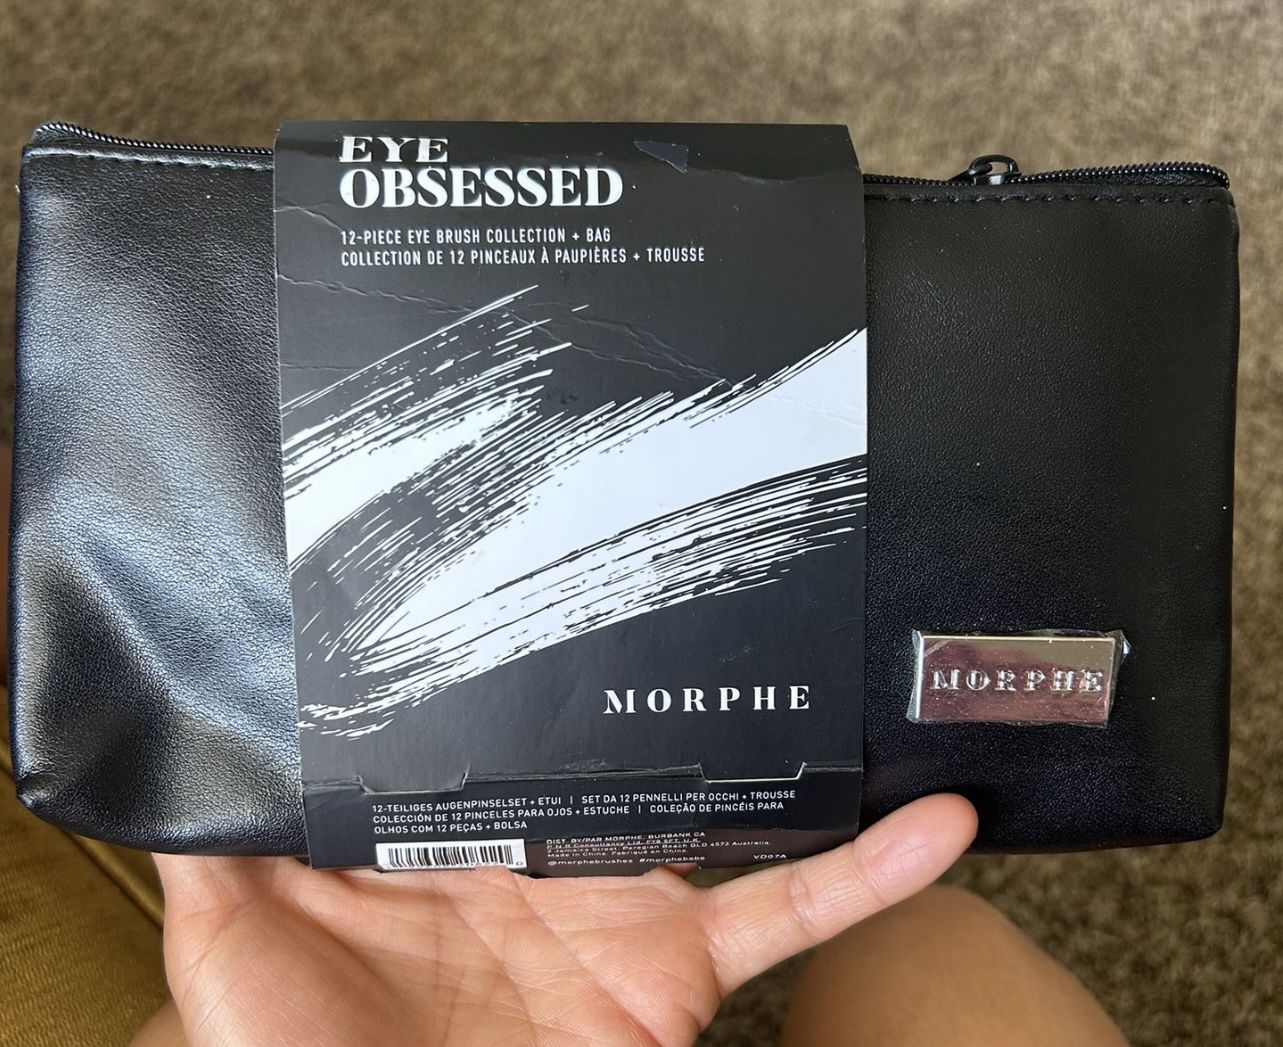 Morphe 12 Piece Eye Obsessed Brush Collection+bag